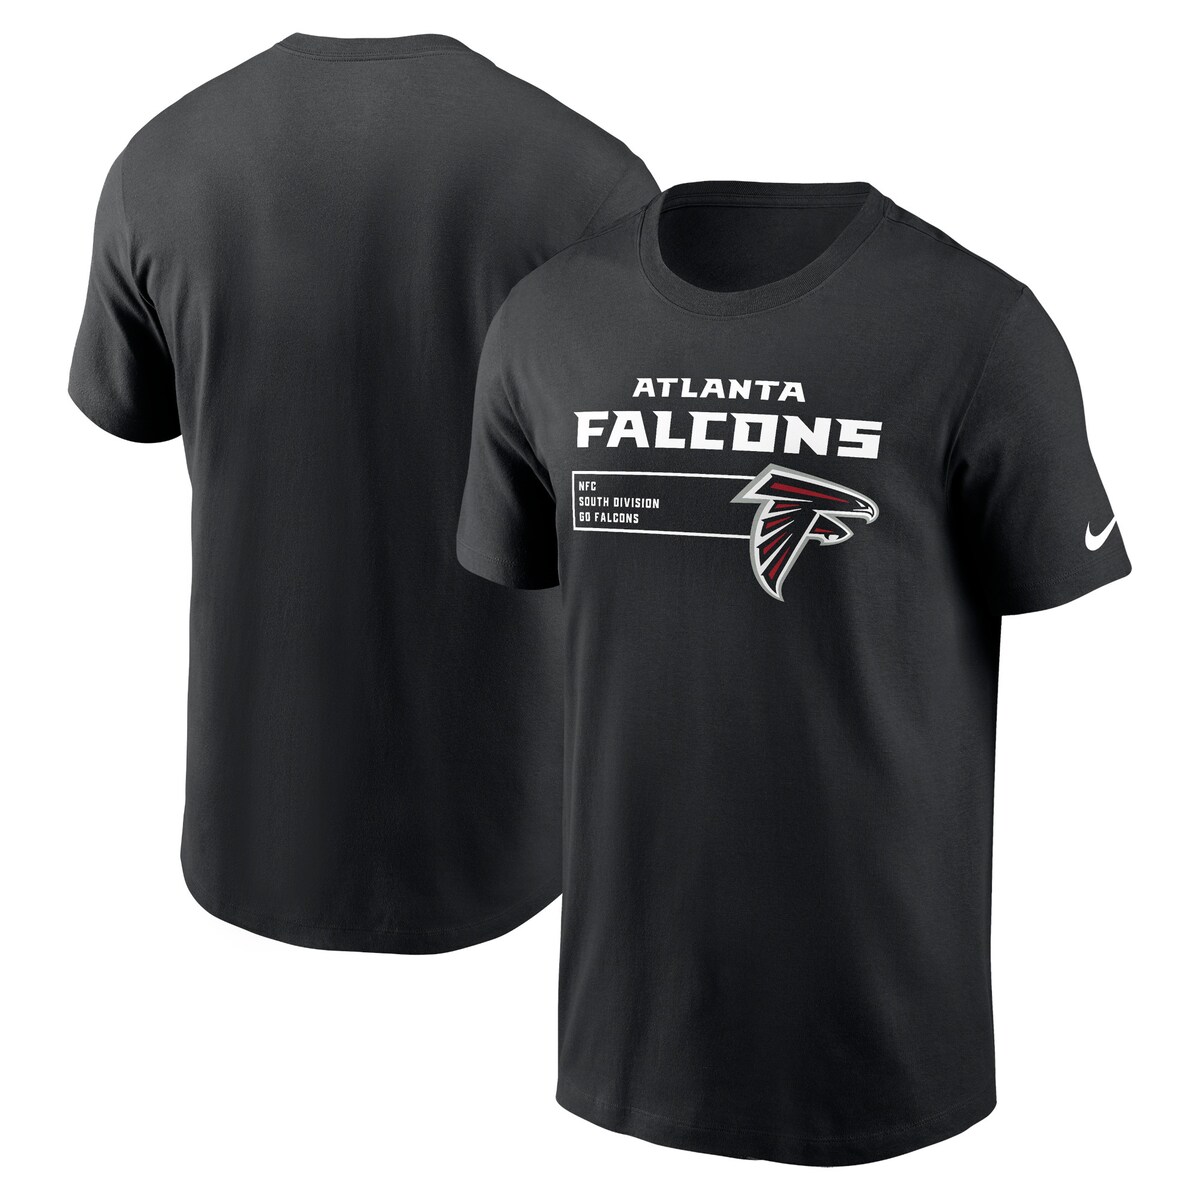 NFL t@RY TVc Nike iCL Y ubN (23 NFL FANGEAR Men's Nike Division Essential SST)